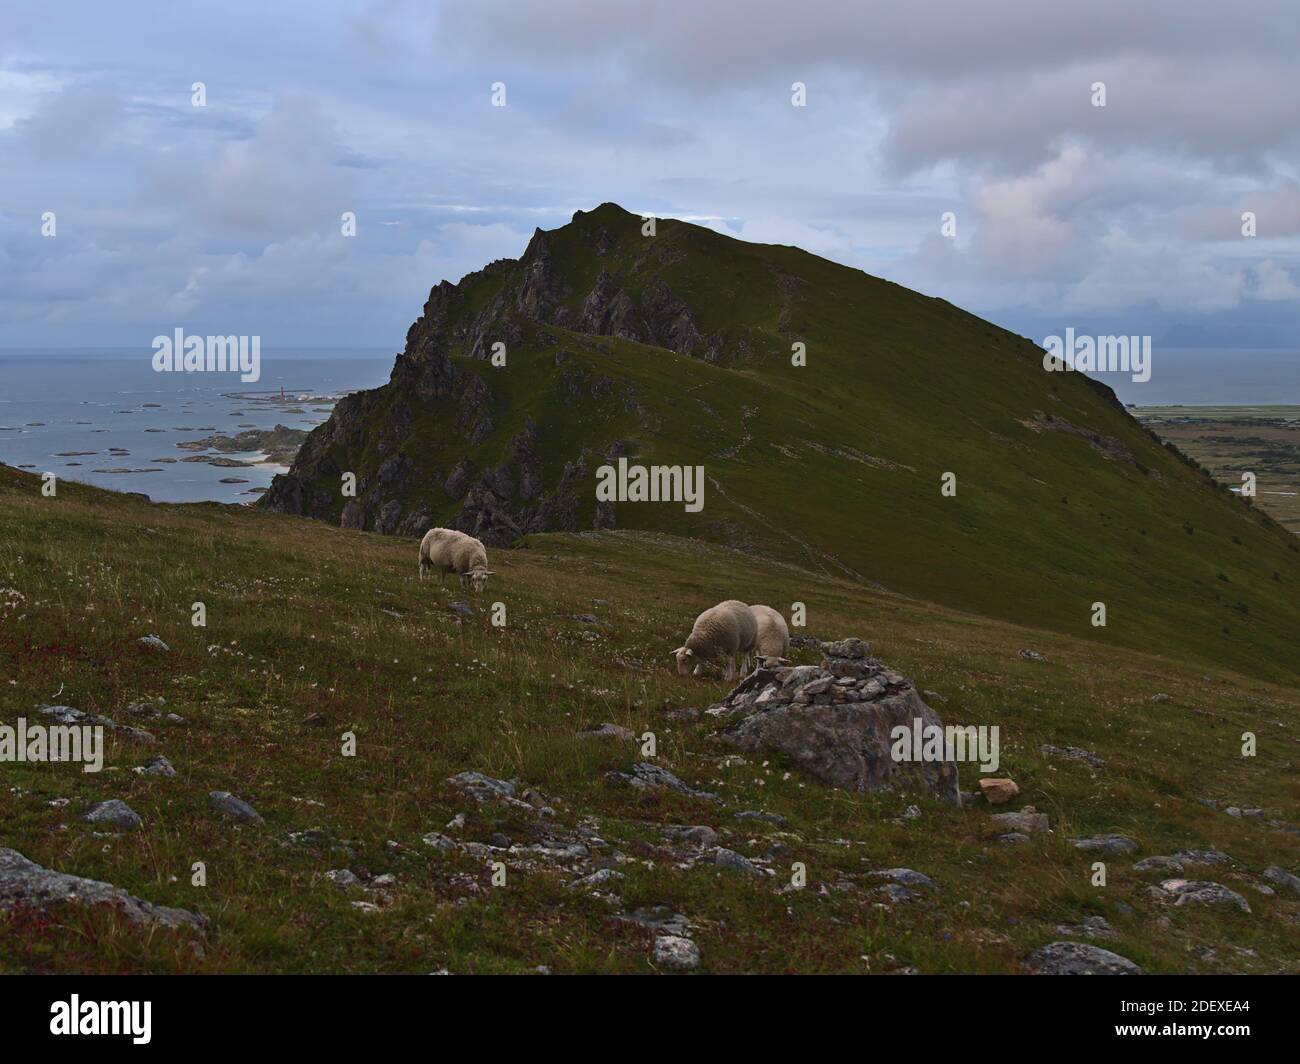 Small flock of sheep grazing on rocky meadow with green grass on mountain near Andenes, Andøya island, Vesterålen in northern Norway on cloudy day. Stock Photo